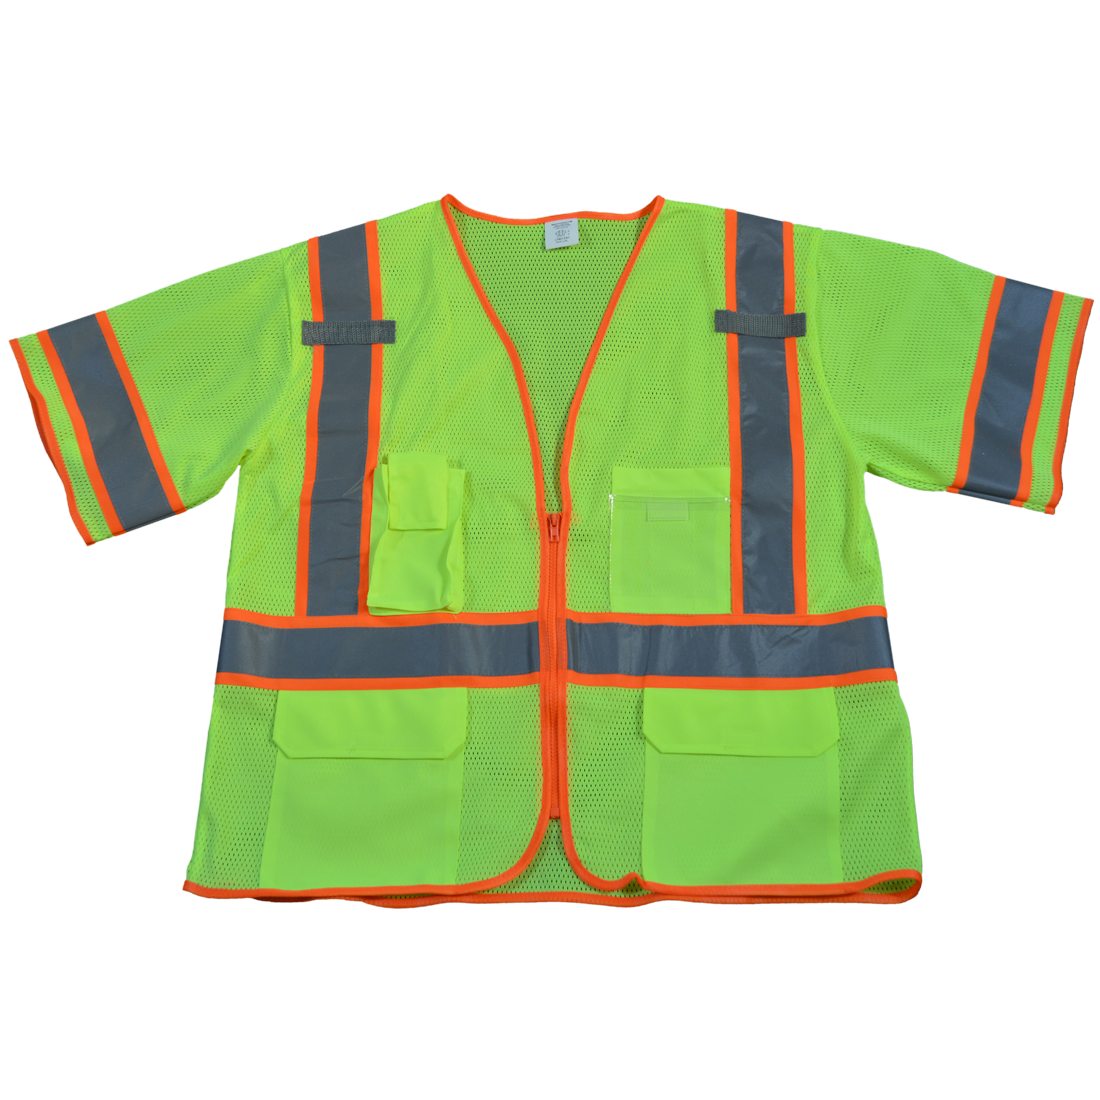 Petra Roc LVM3-CB1-L-XL Safety Vest Ansi Class 3 Lime Mesh Deluxe with Orange Contrast Binding Zipper Closure 5 Pockets & 2 Mic Tab, Large